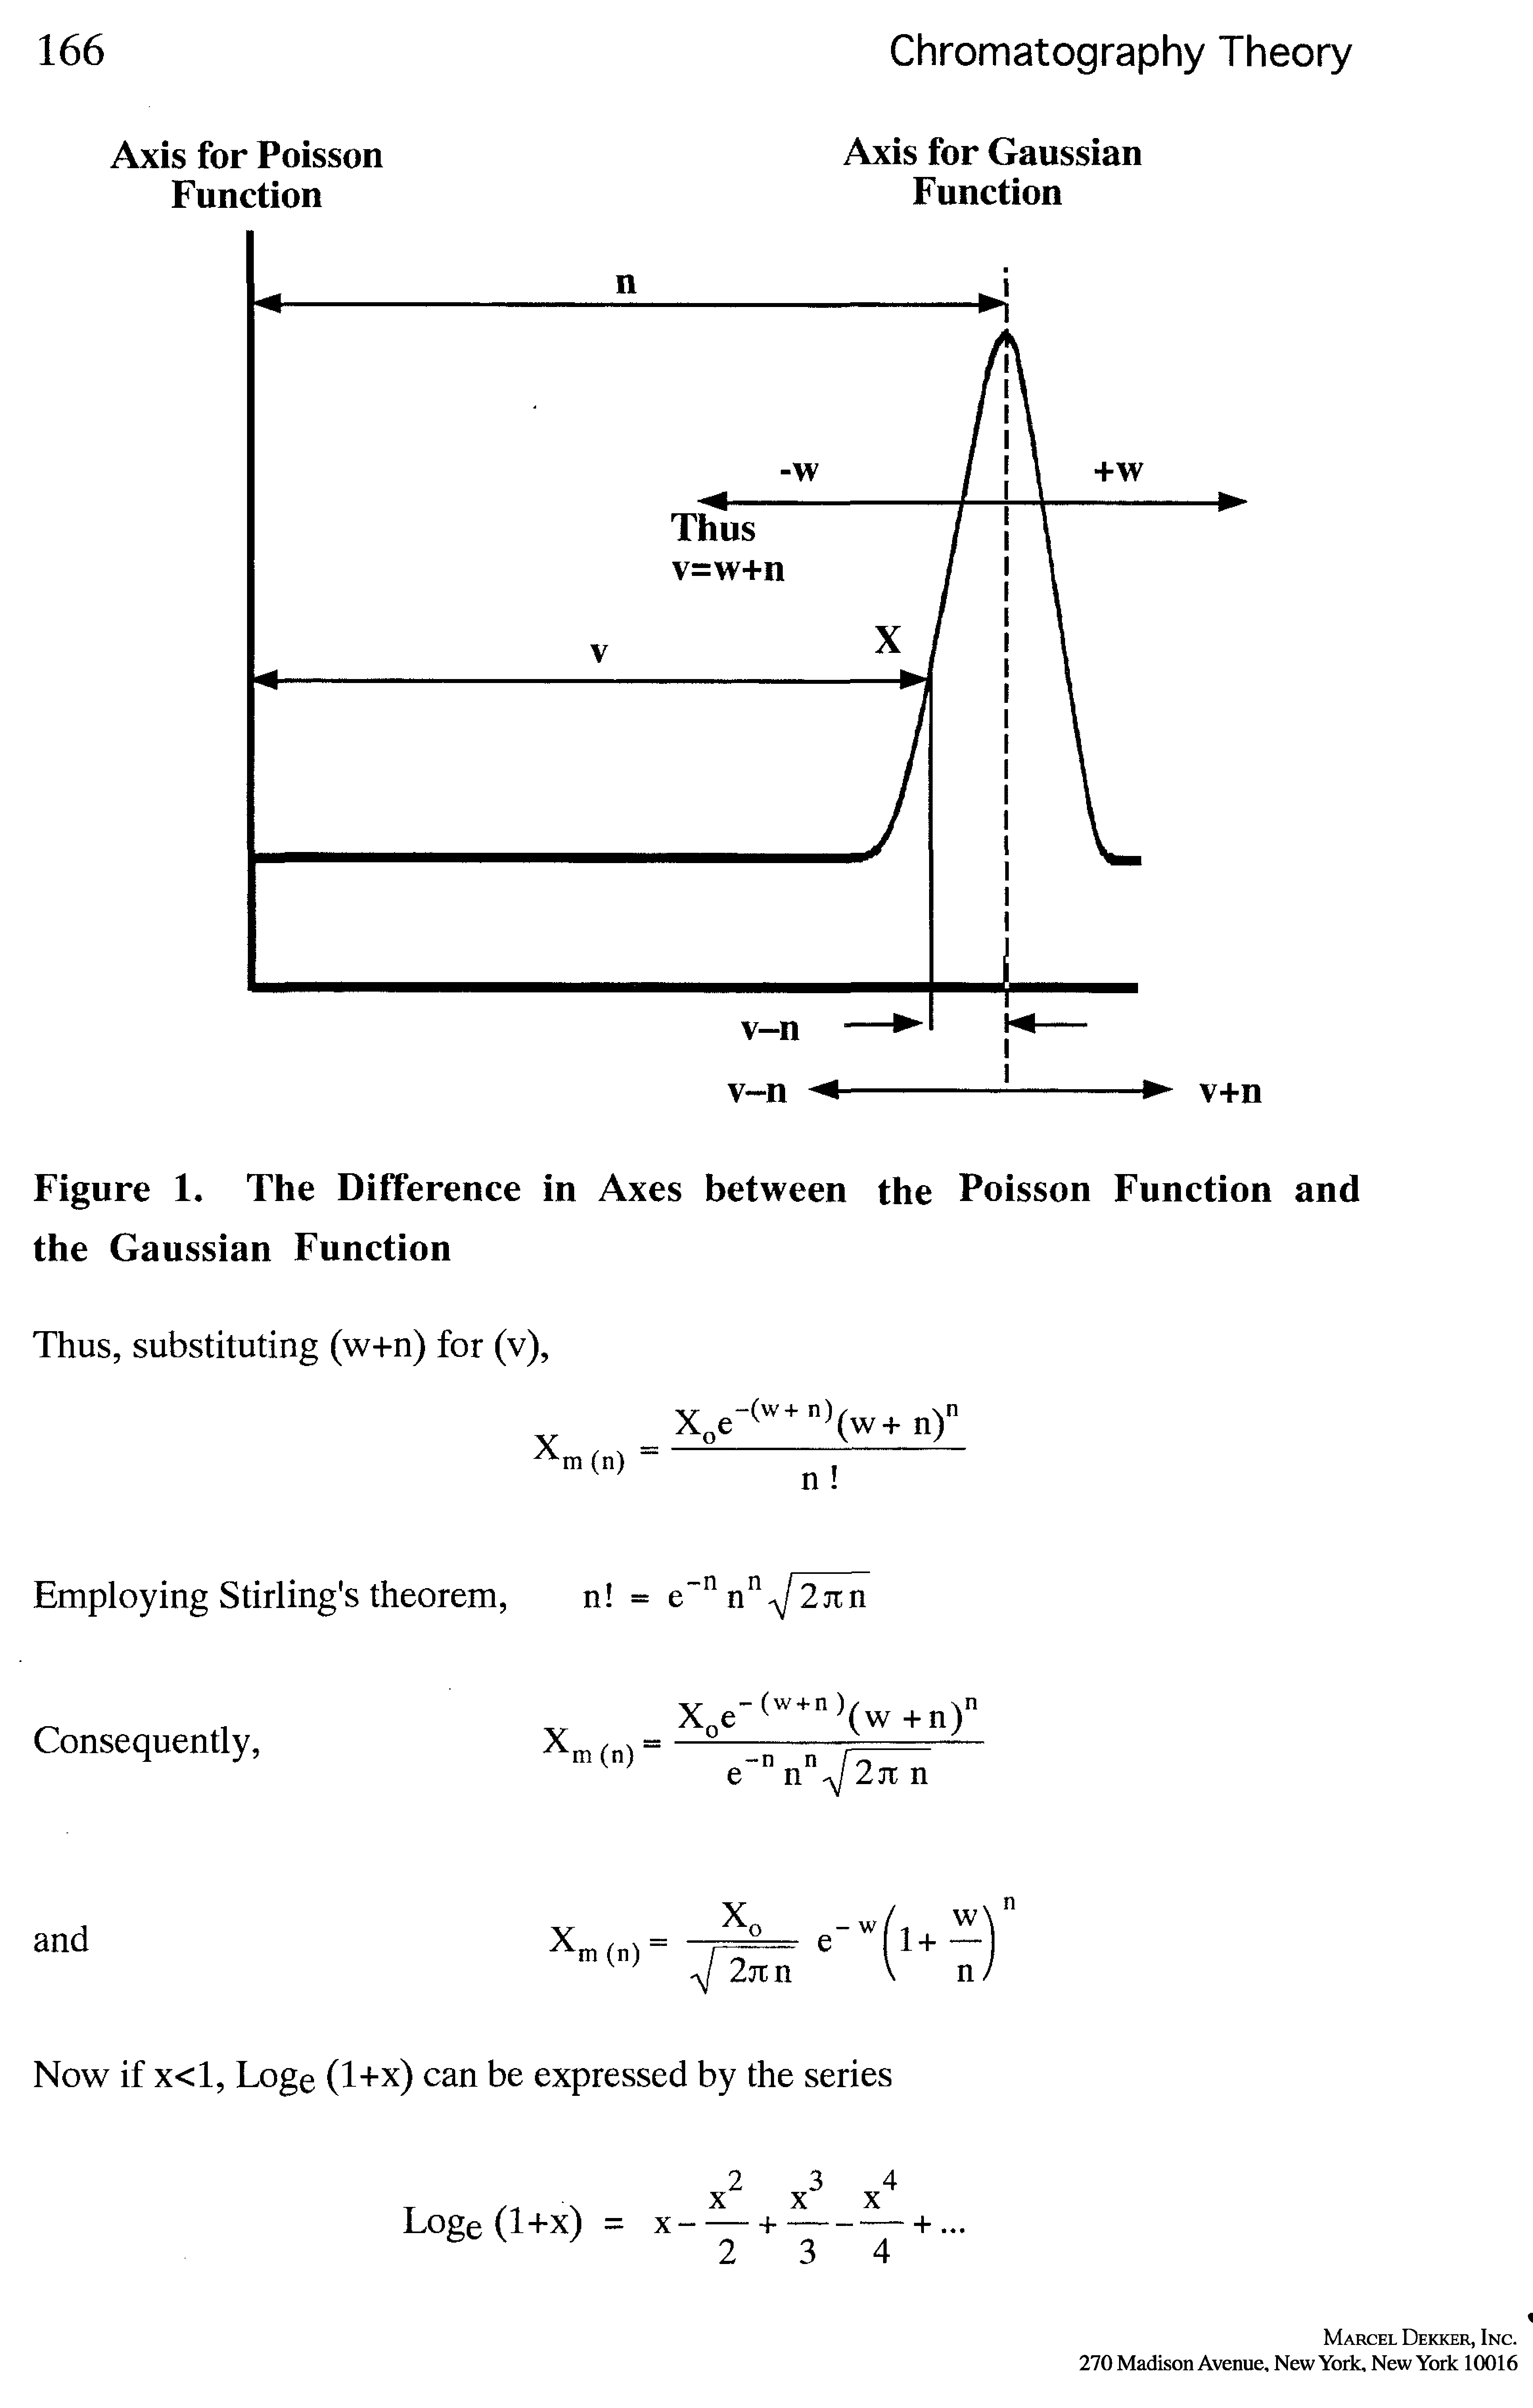 Figure 1. The Difference in Axes between the Poisson Function and the Gaussian Function...